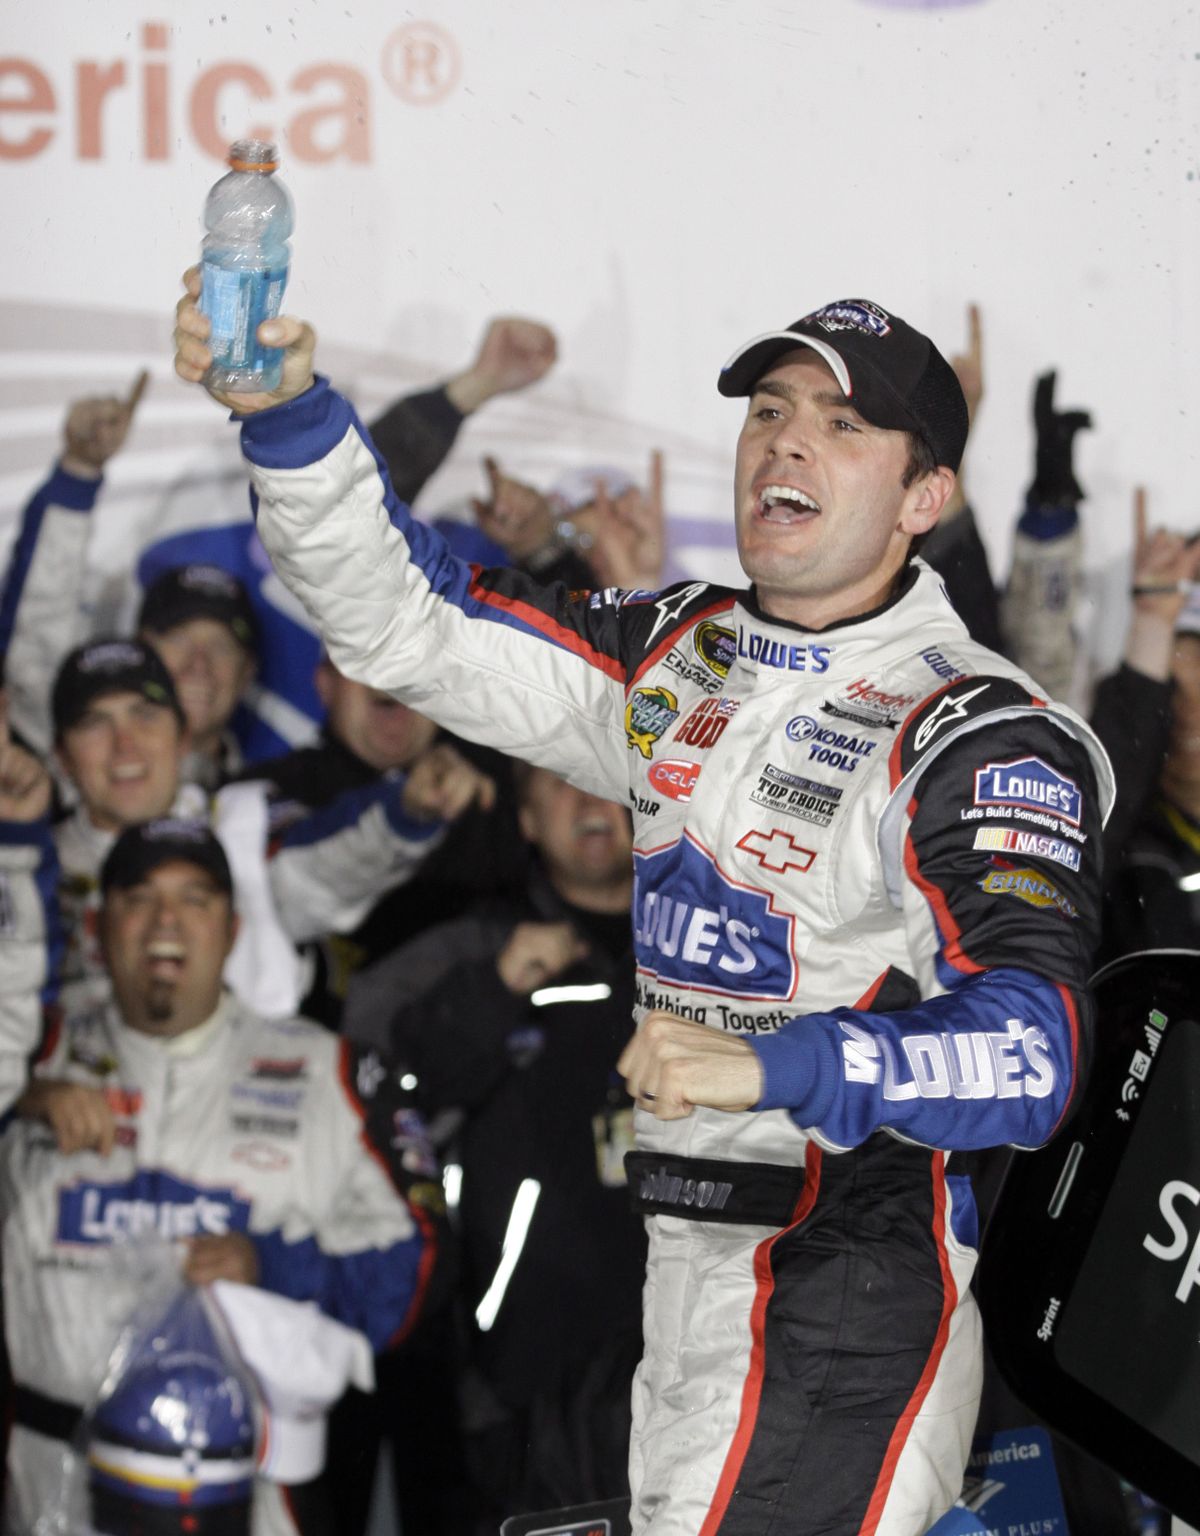 Johnson celebrates in victory lane after end of amazing weekend.  (Associated Press / The Spokesman-Review)